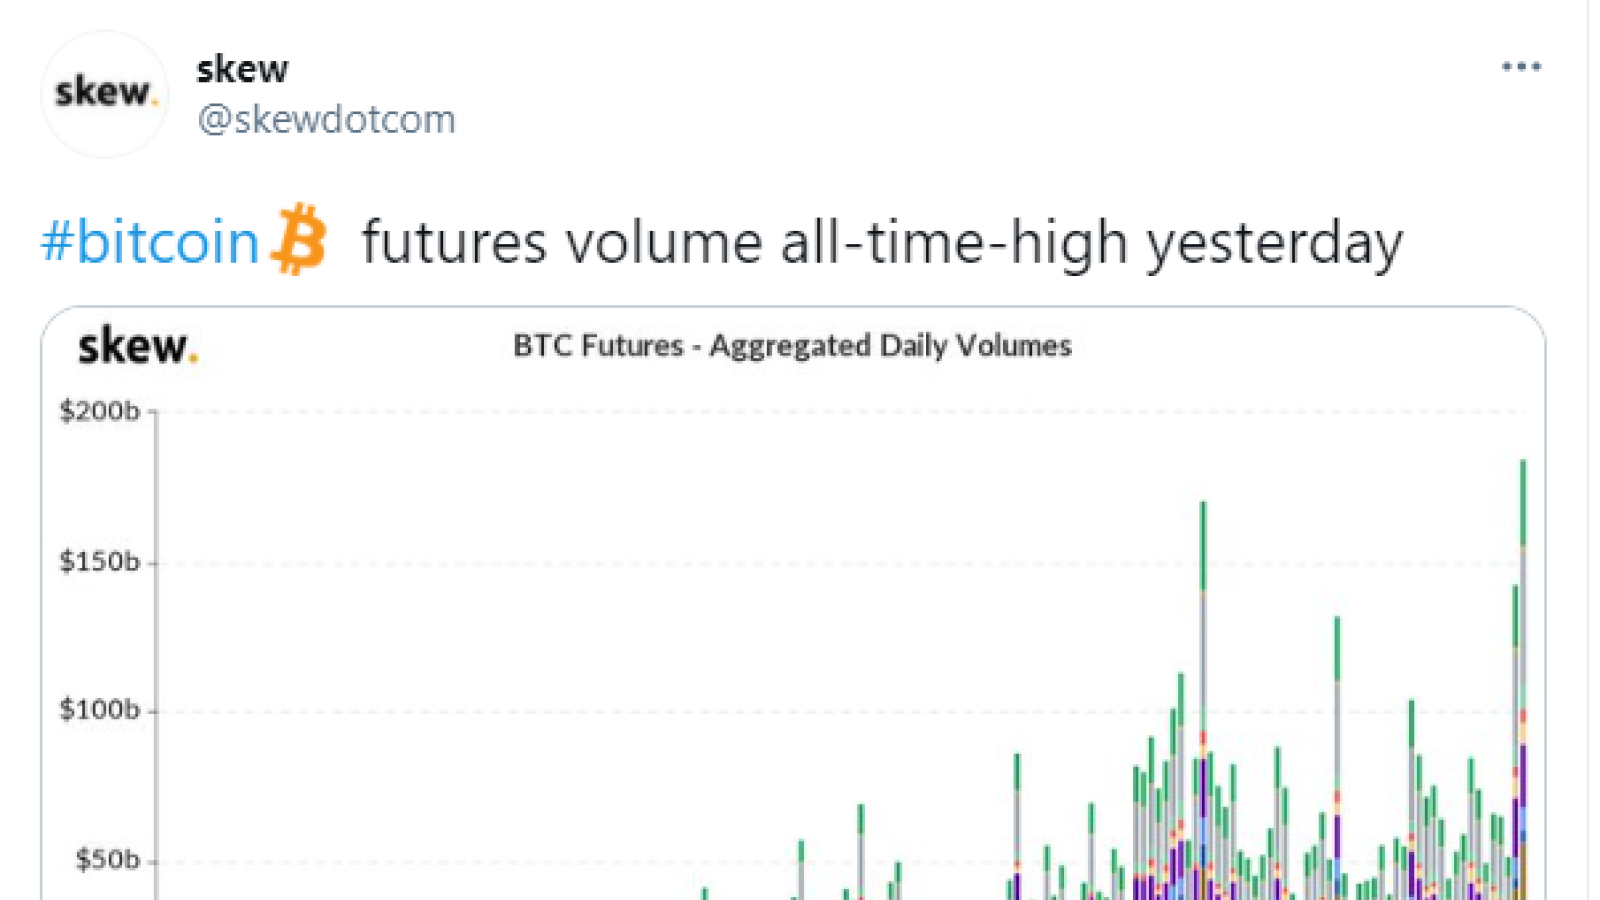 Bitcoin (BTC) futures witnessed record-breaking session